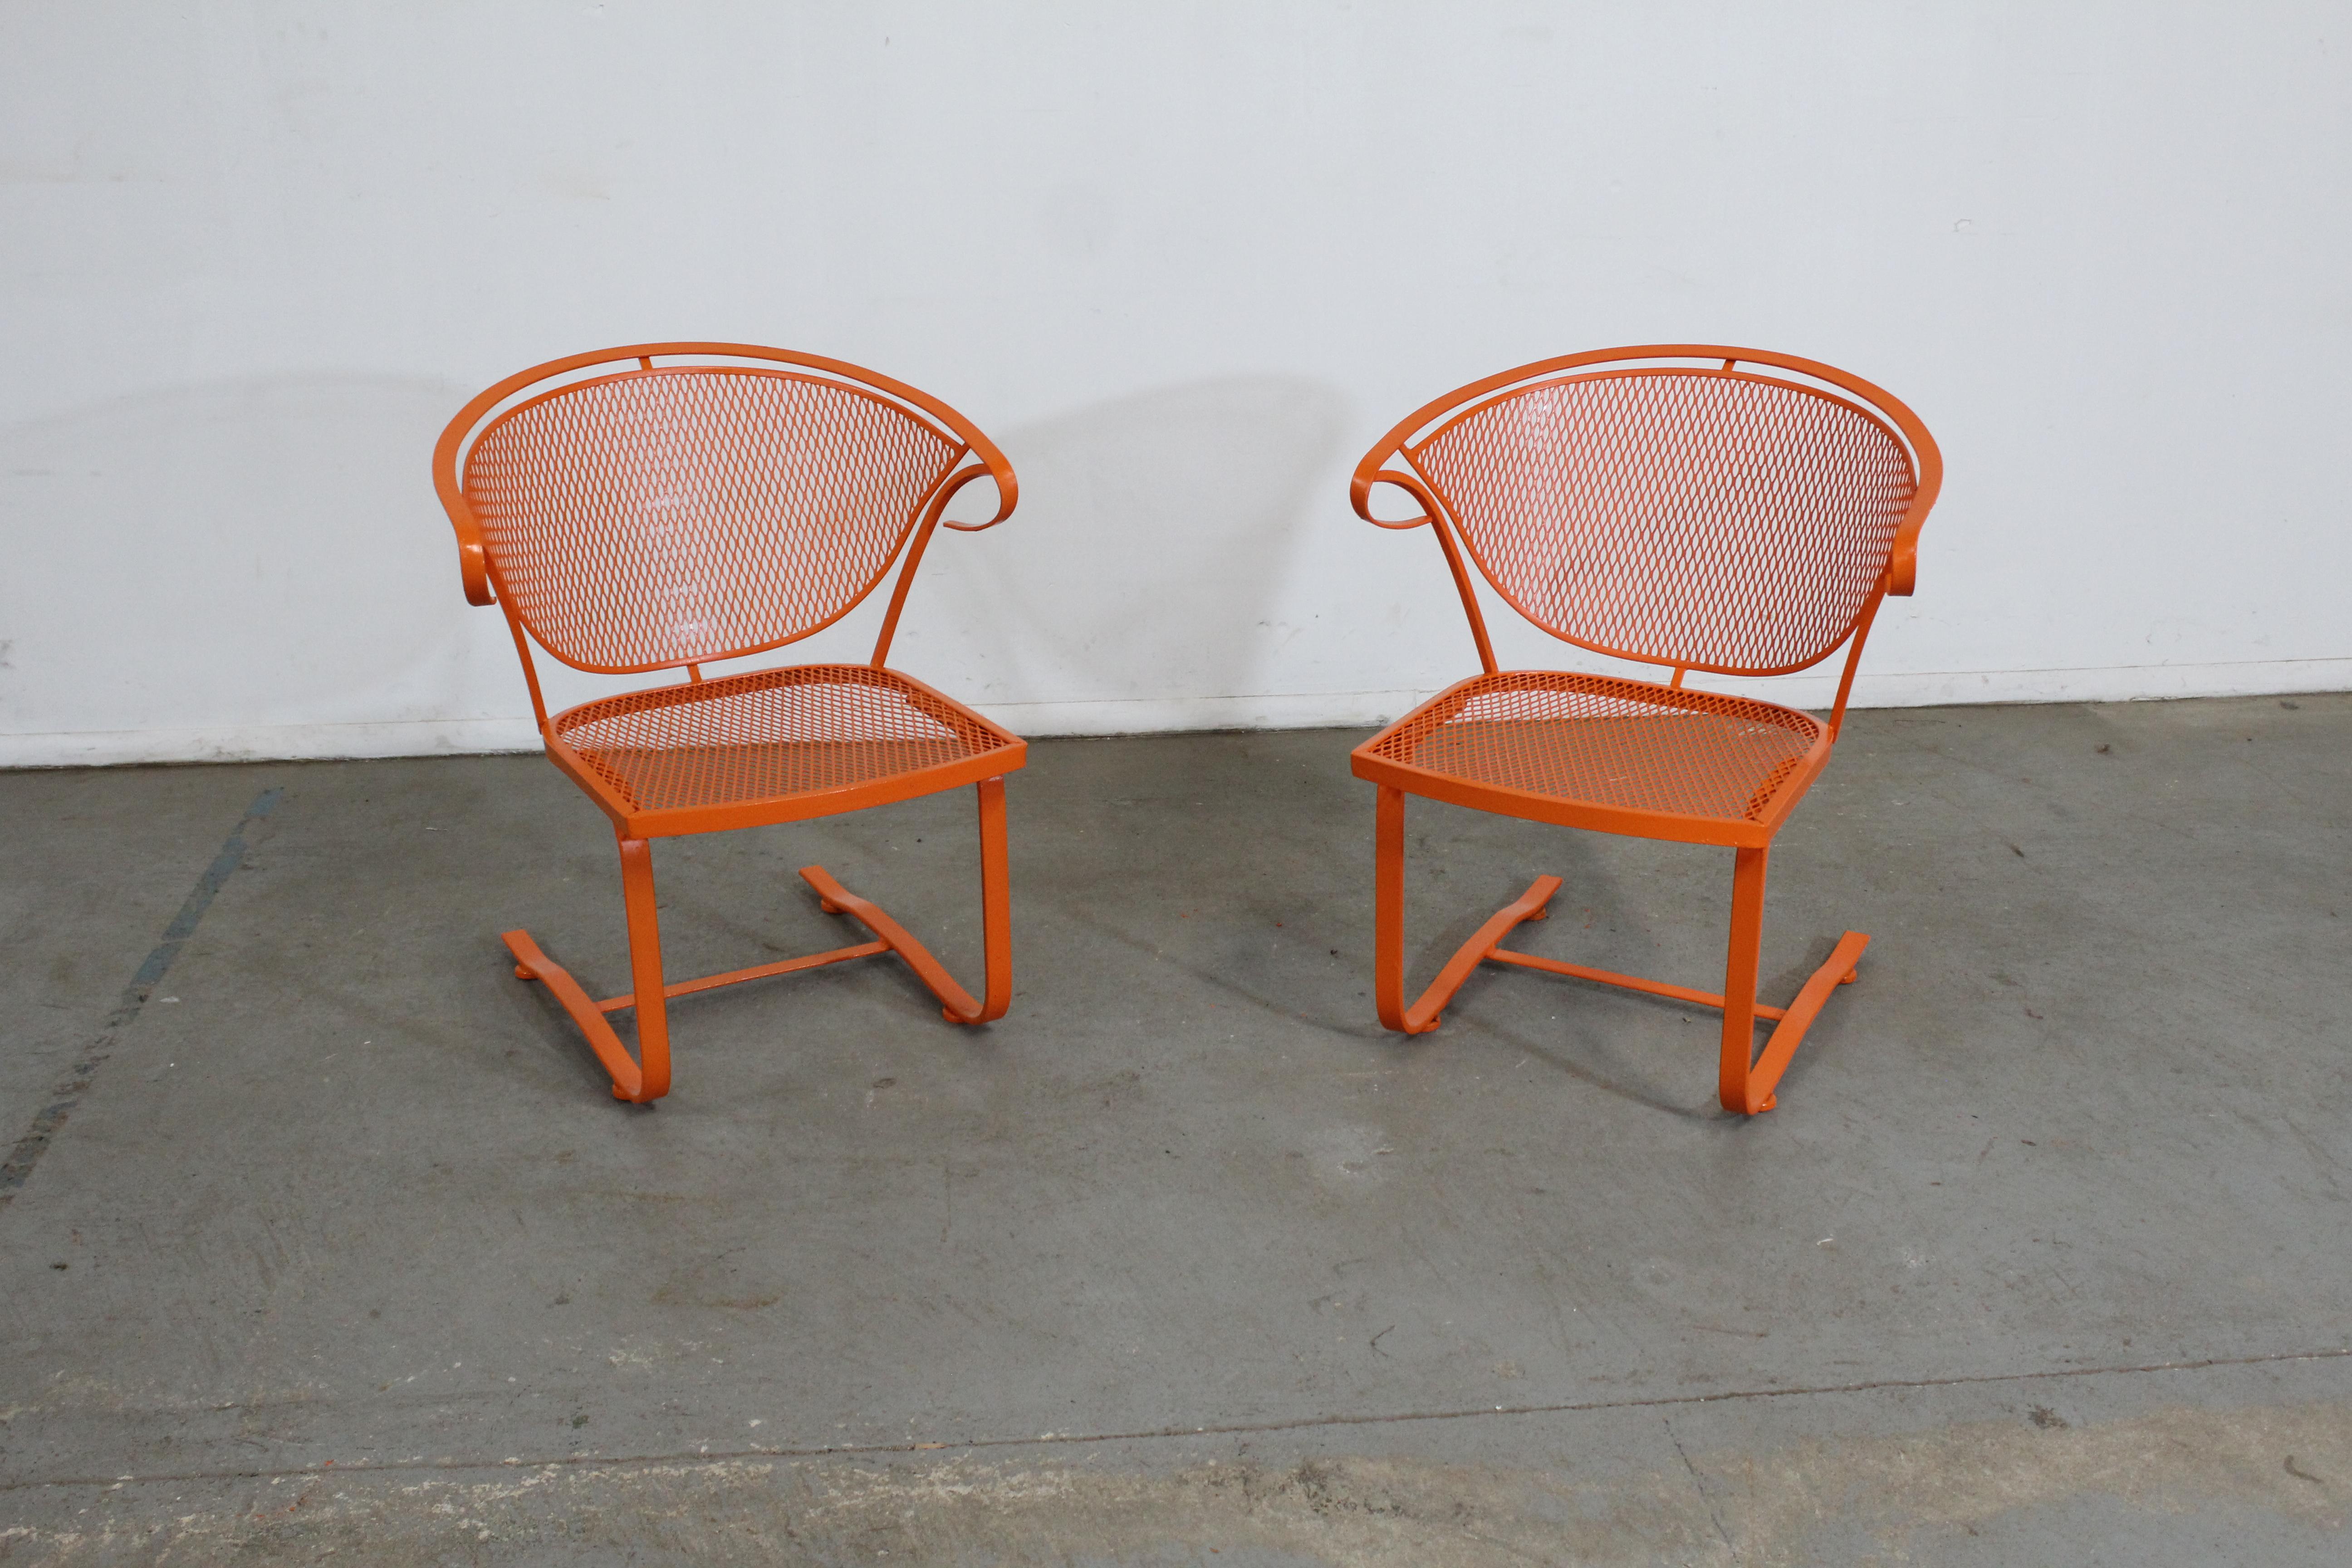 Pair of Mid-Century Modern Atomic Orange Salterini Style Outdoor Metal Curved Back Springer Chairs

Offered is a pair of Pair of Mid-Century Modern Atomic orange Outdoor Metal Curved Back Chairs, circa 1968. These chairs have been repainted in an